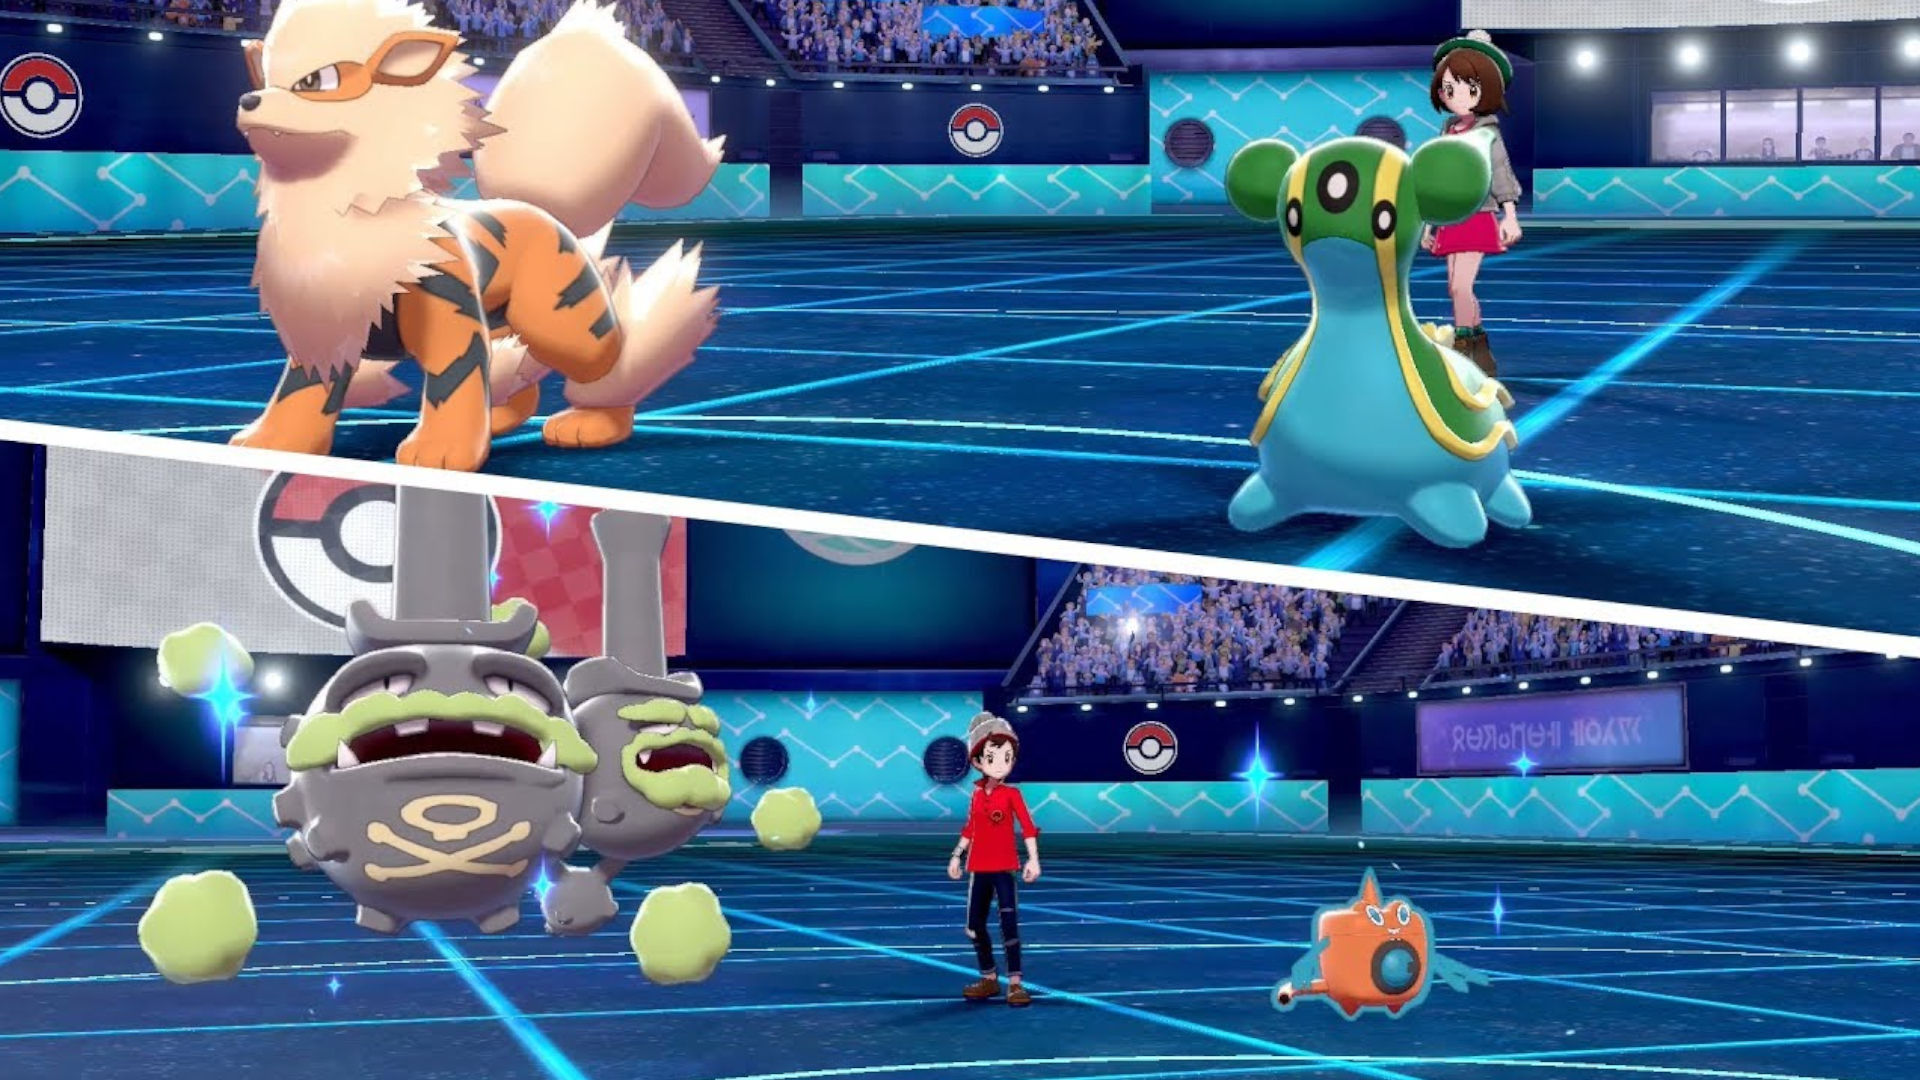 Pokémon battle screen from Sword and Shield 